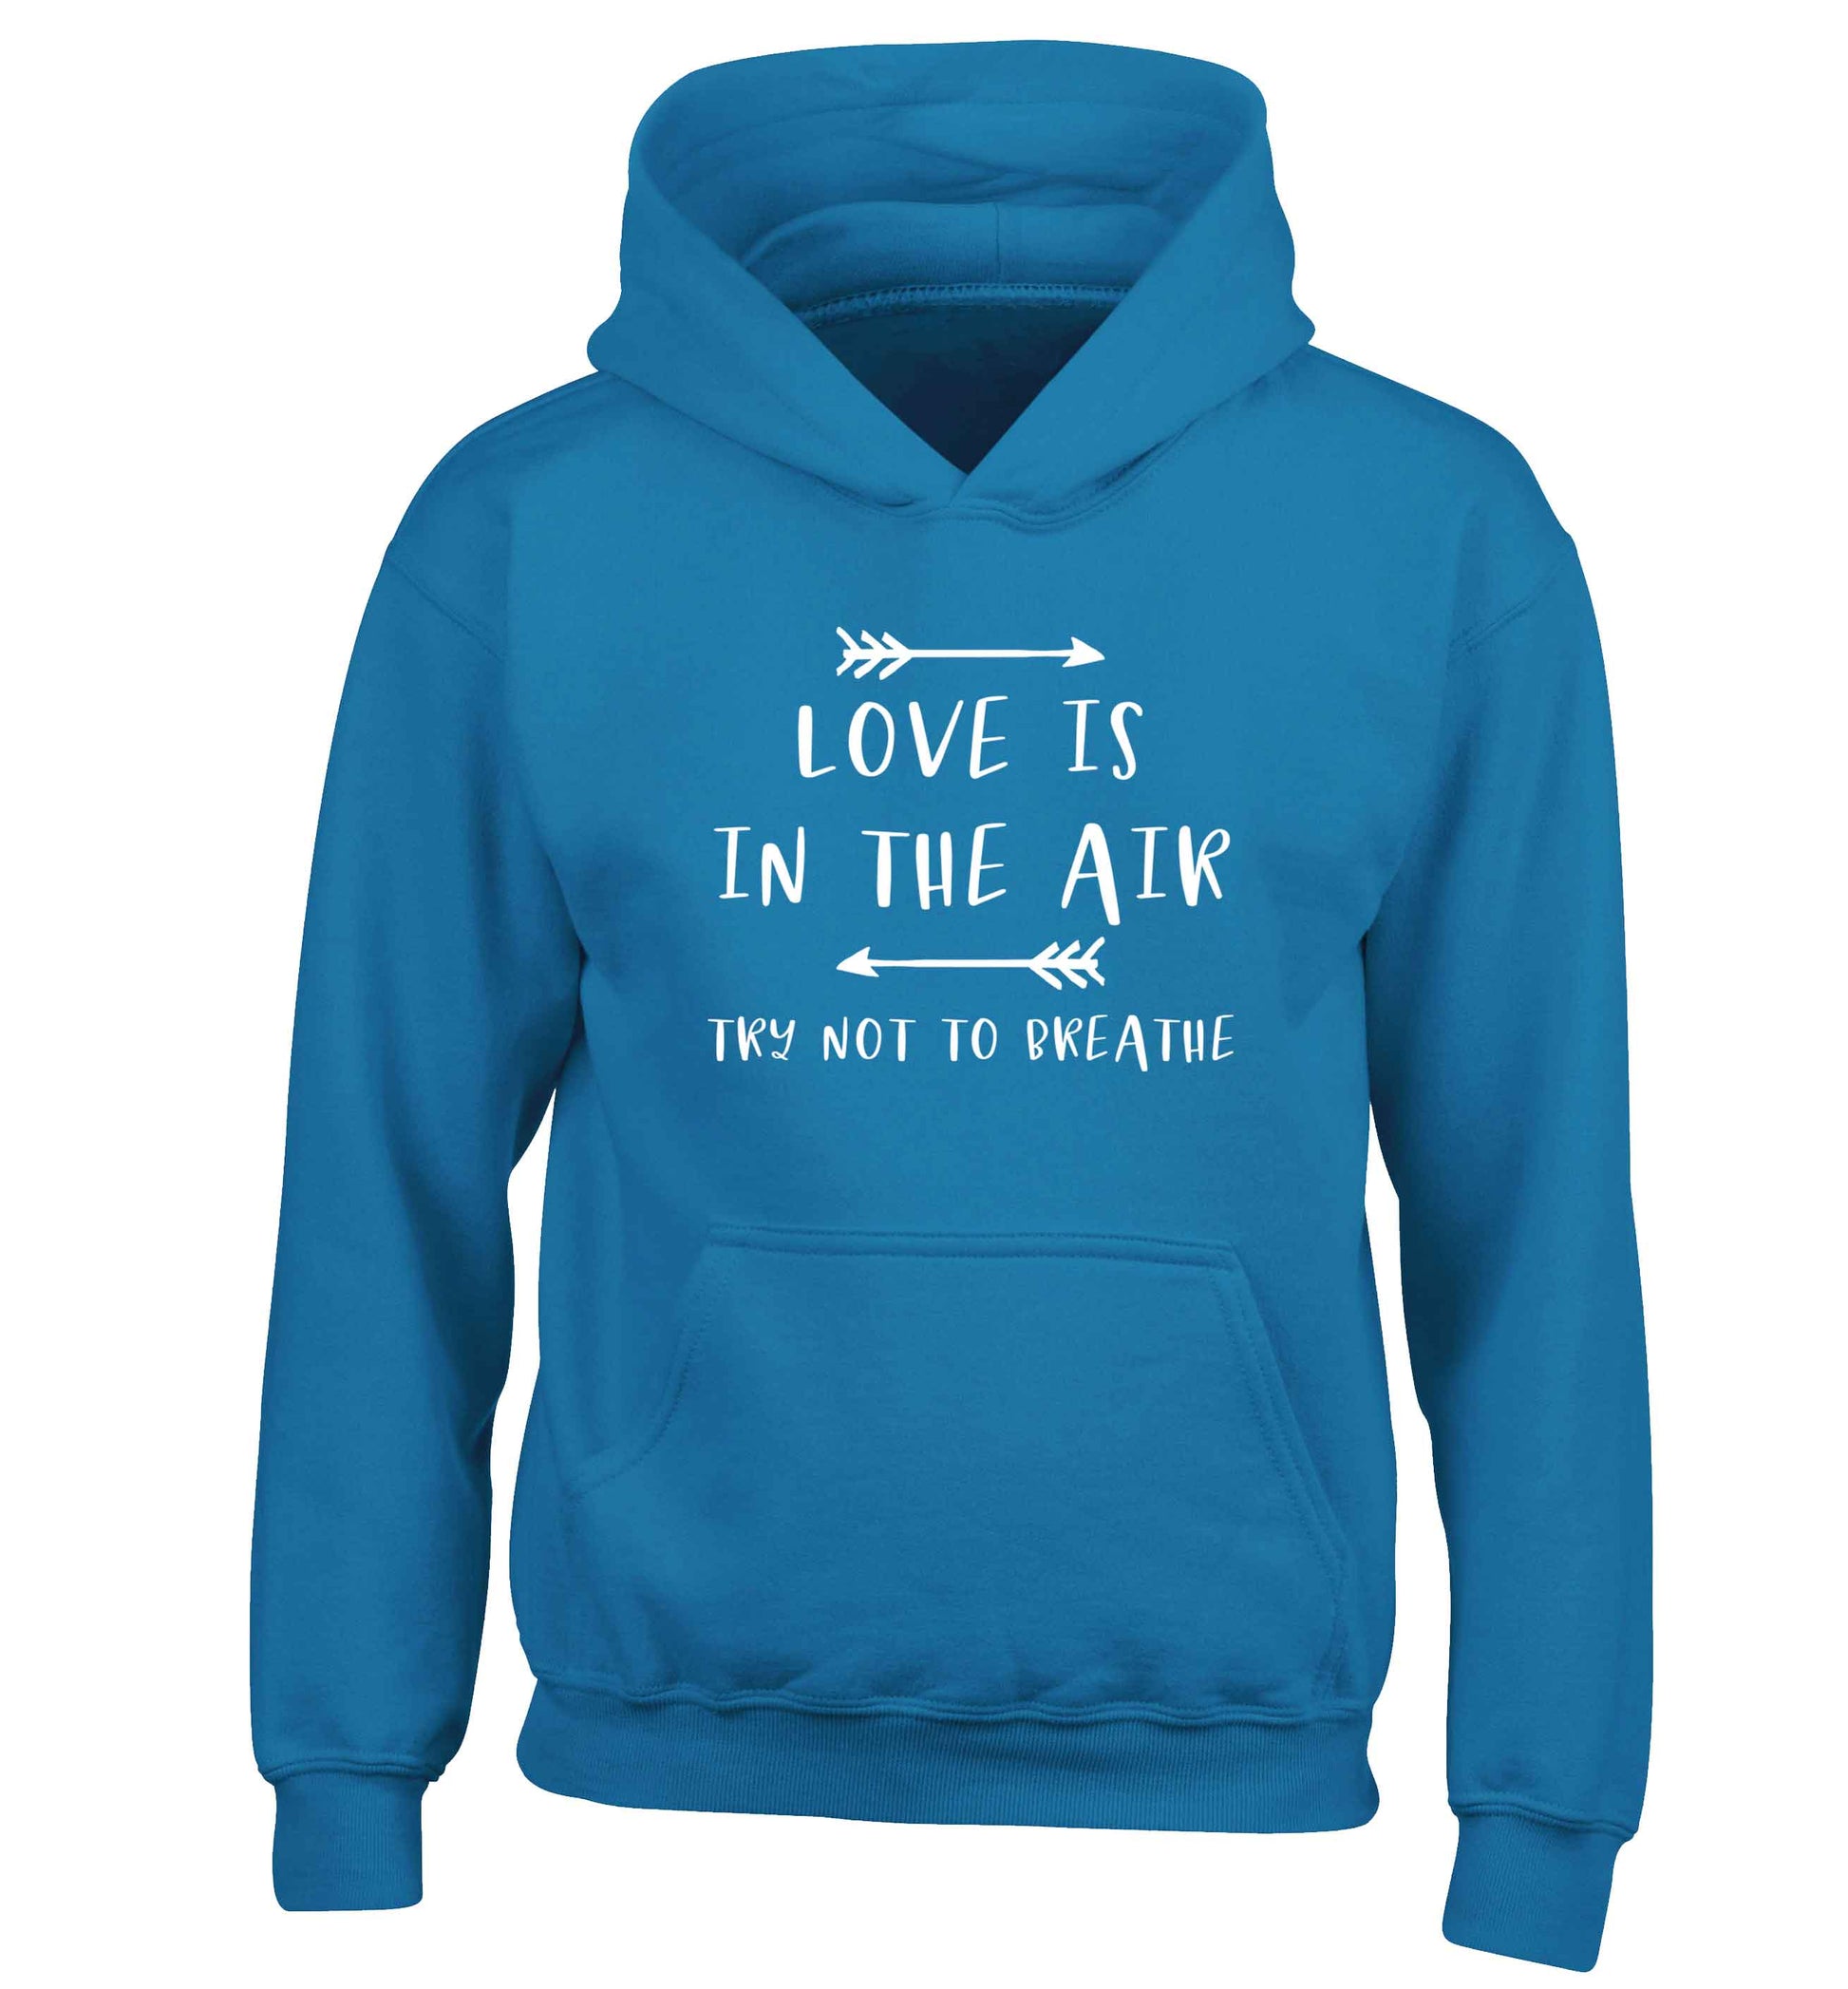 Love is in the air try not to breathe children's blue hoodie 12-13 Years